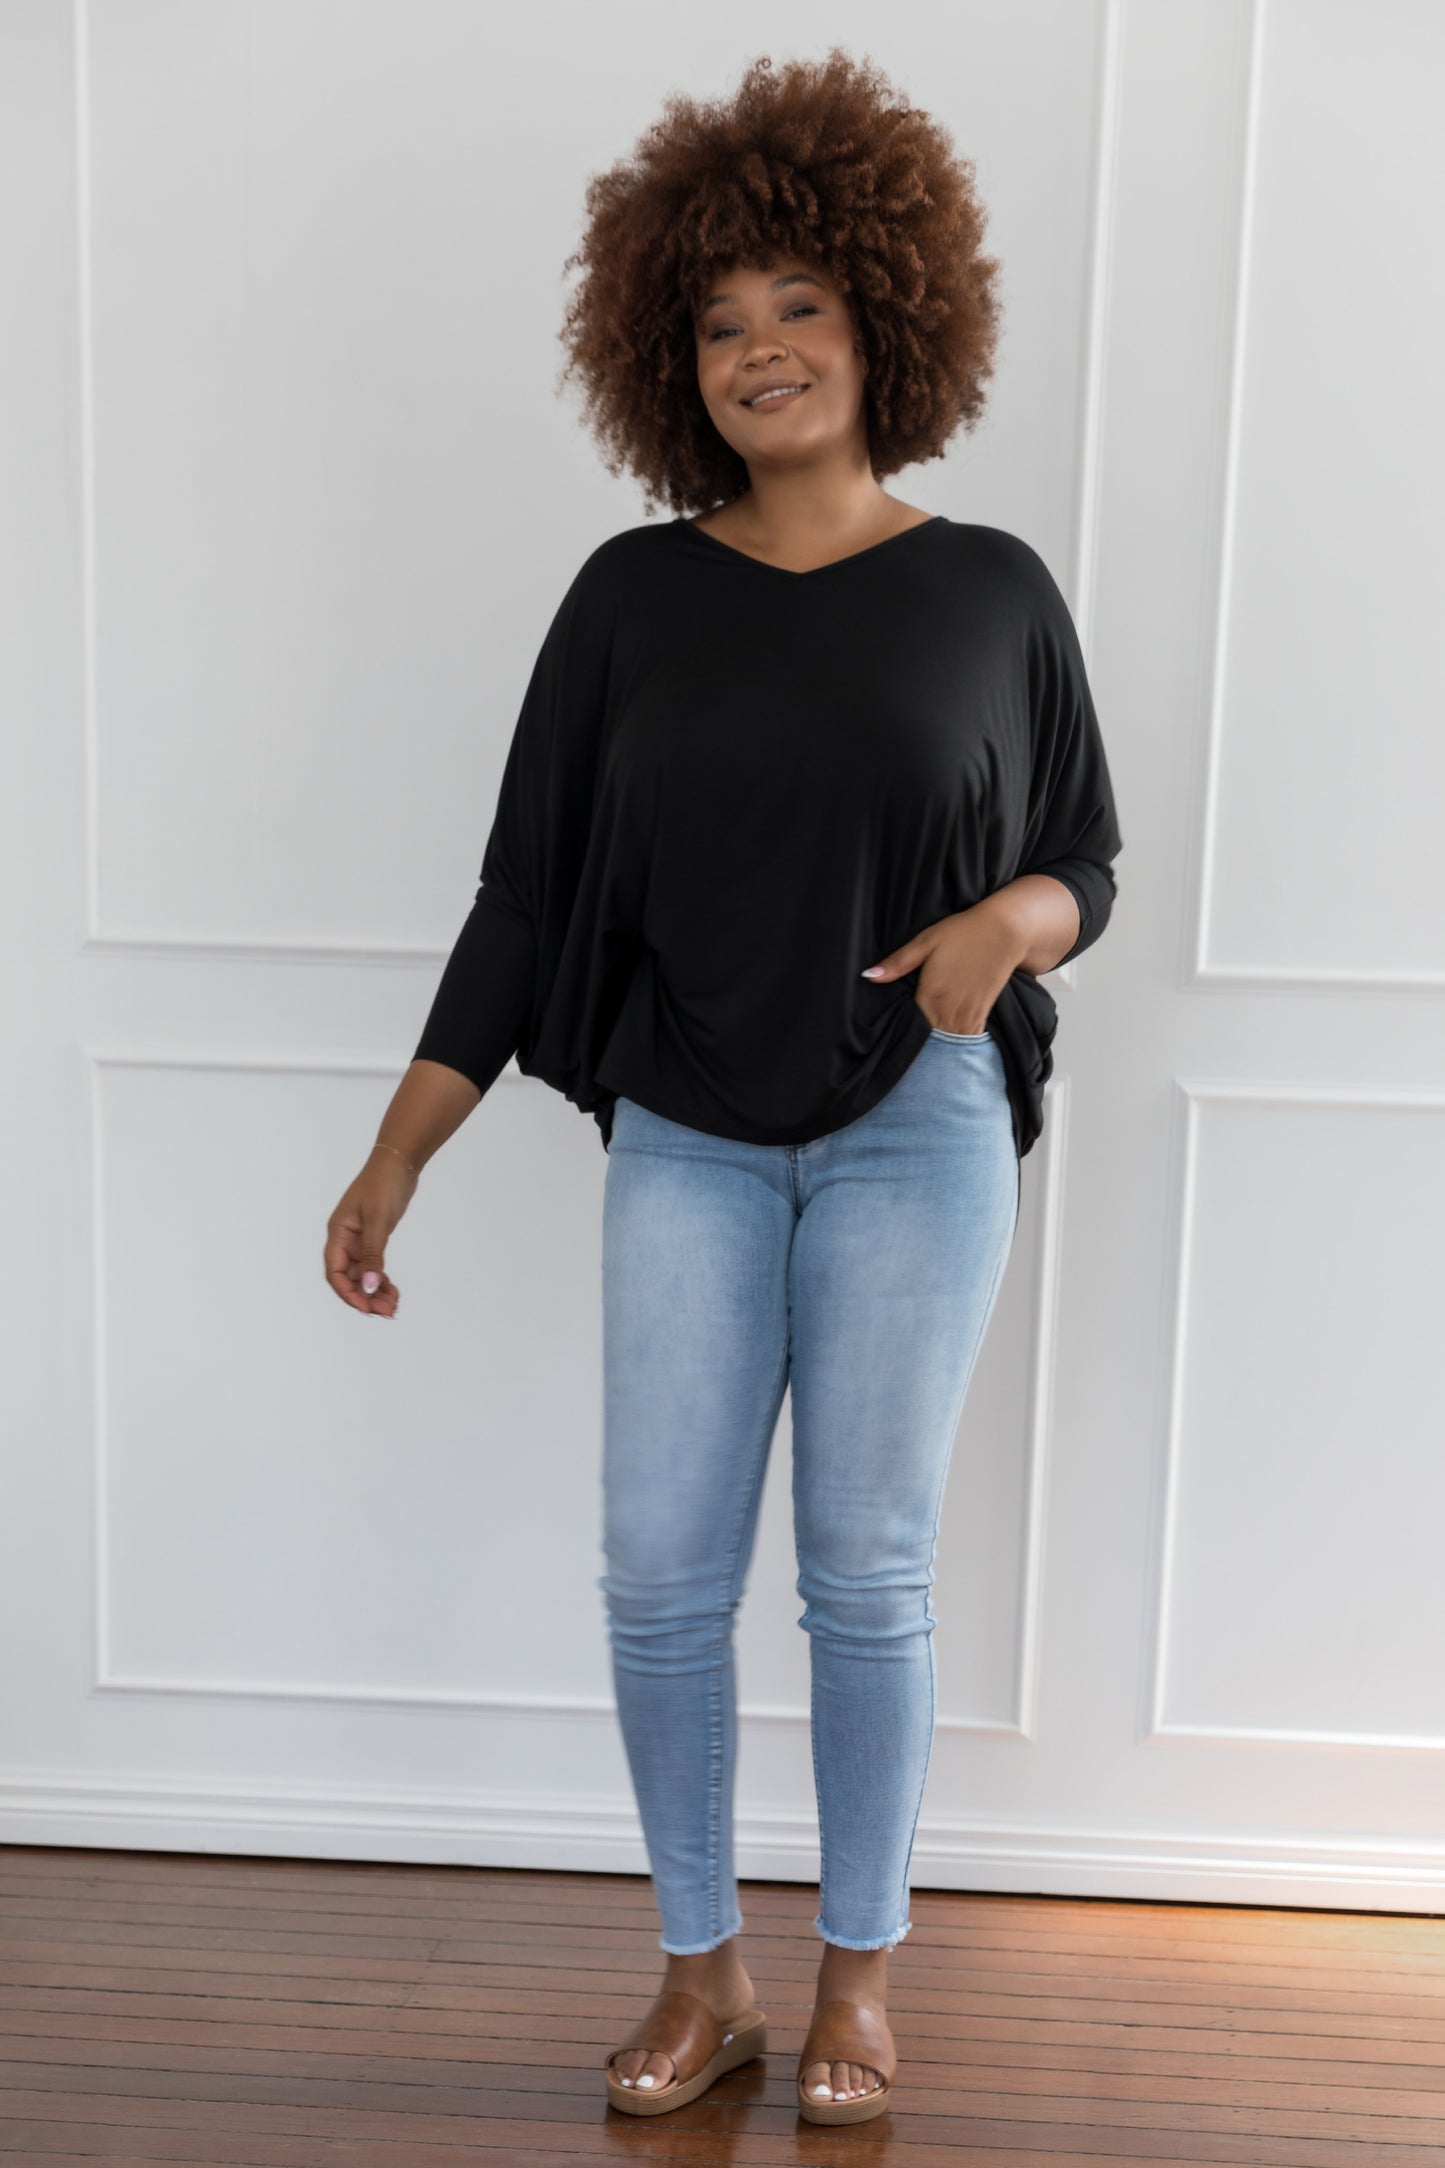 Plus-Sized Black Tops | PQ Collection | Long Sleeve Hi Low Miracle Top